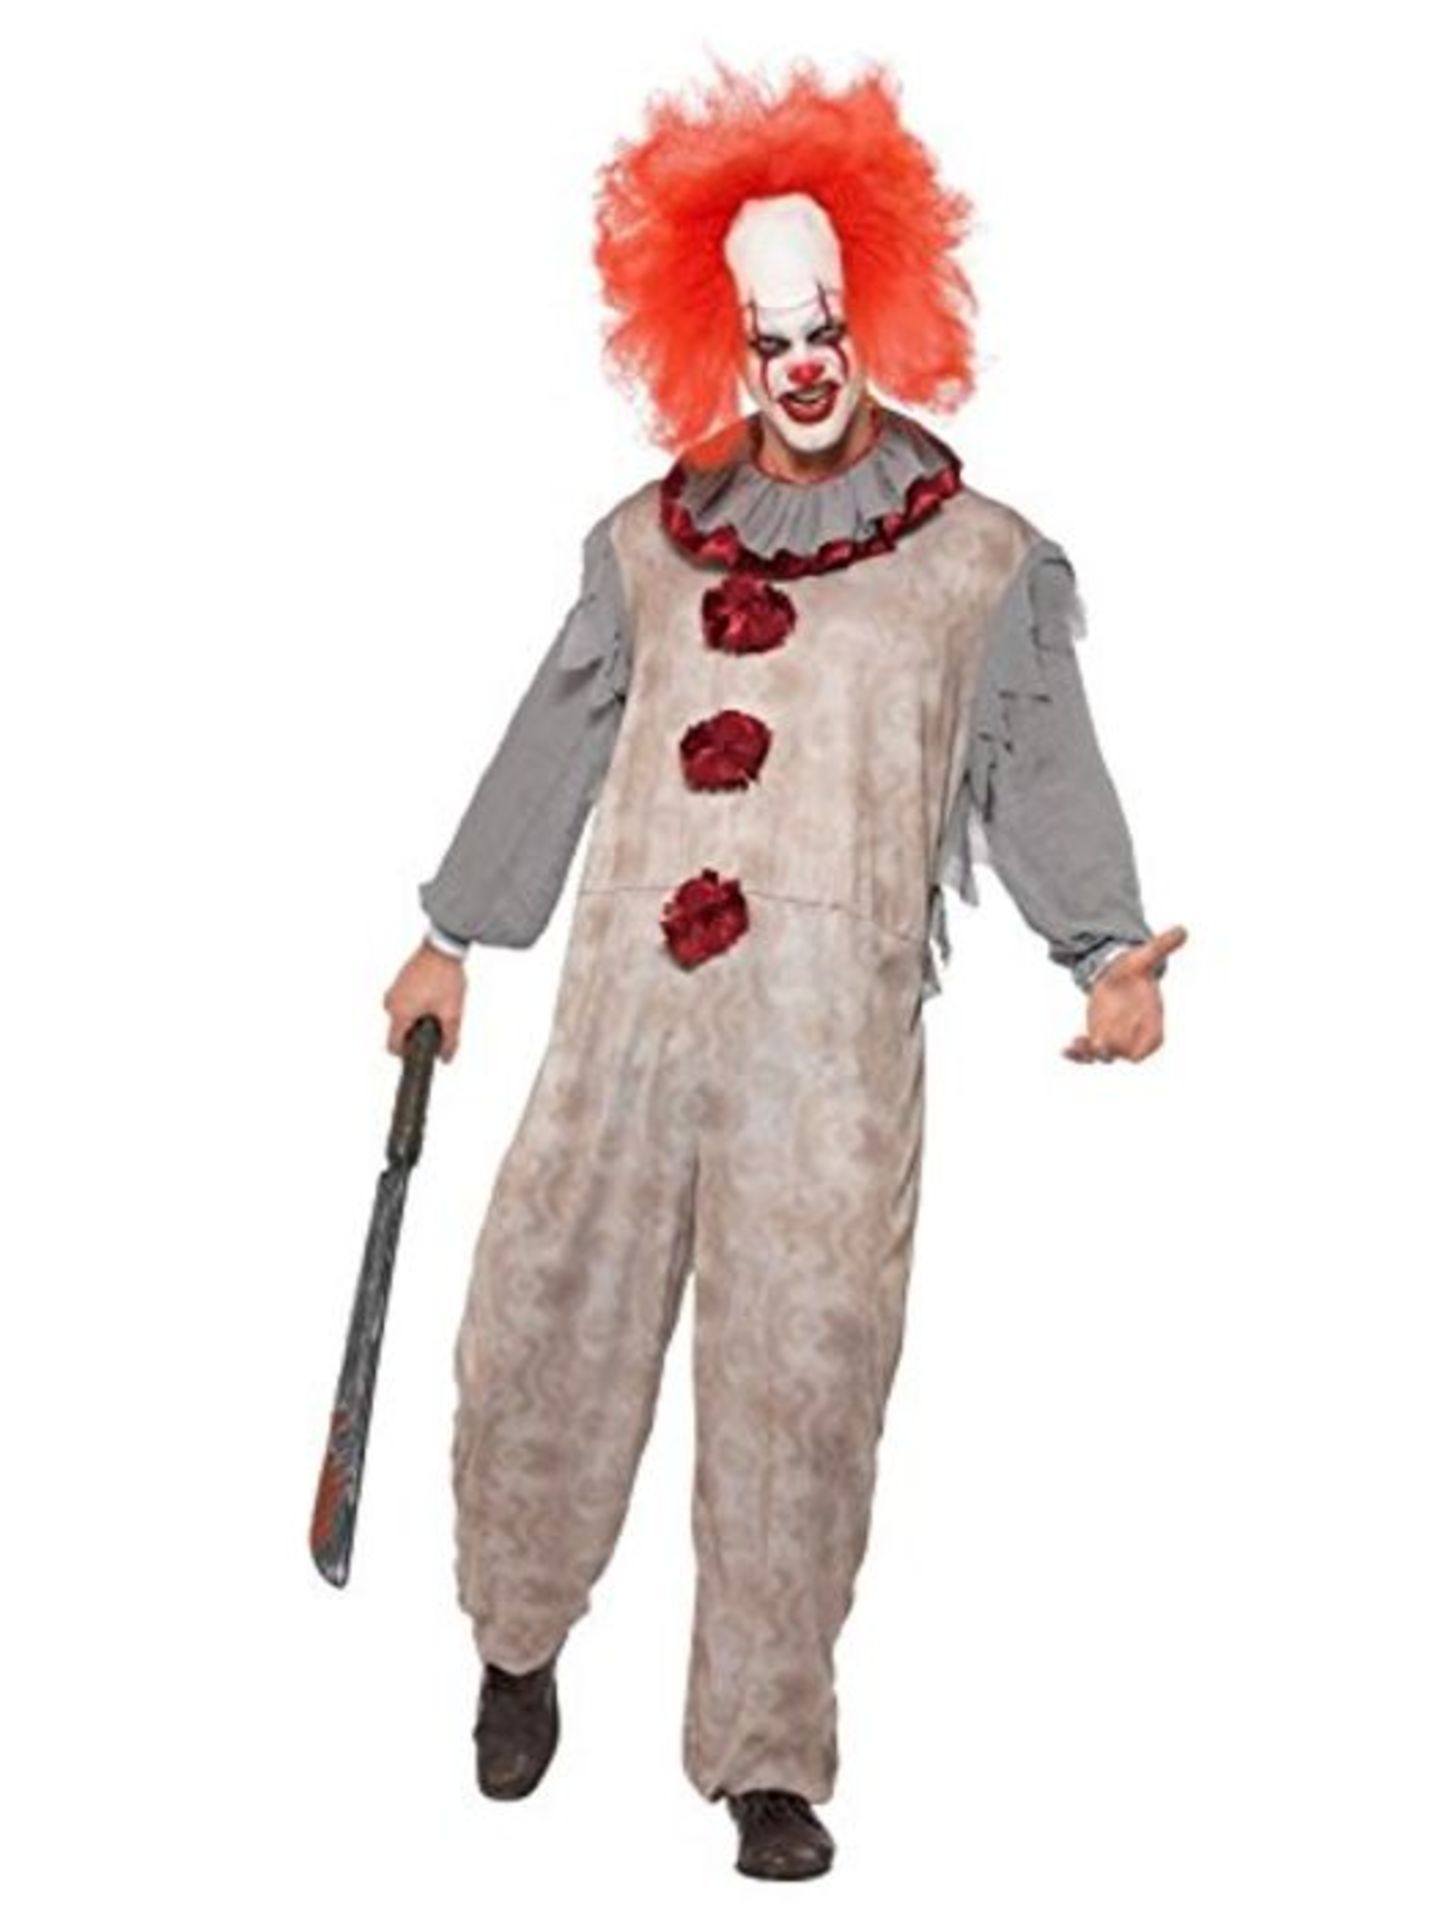 Smiffys Vintage Clown Costume, Grey, Red, M - Size 38"-40"